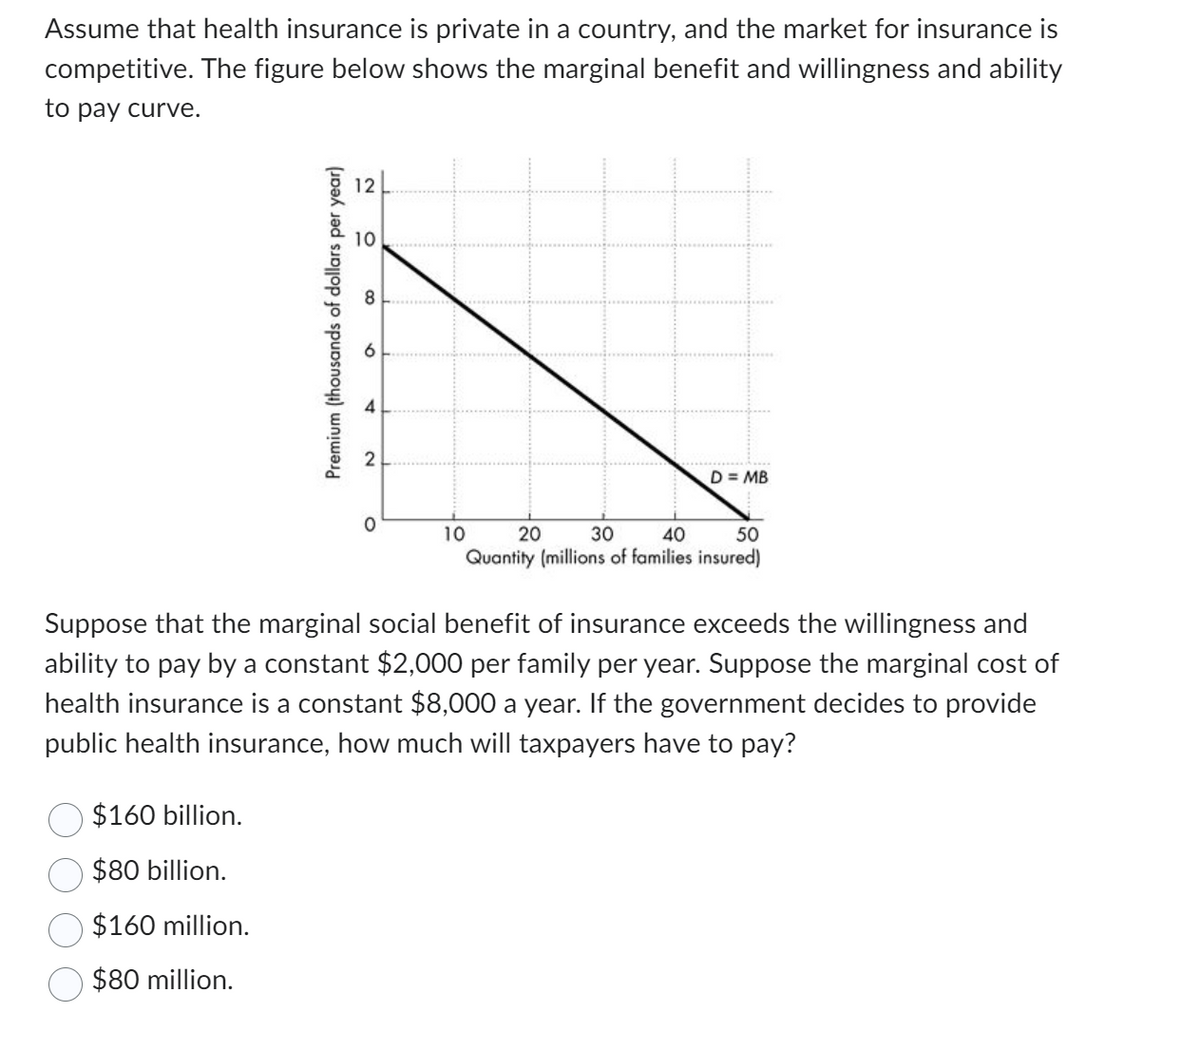 Assume that health insurance is private in a country, and the market for insurance is
competitive. The figure below shows the marginal benefit and willingness and ability
to pay curve.
Premium (thousands of dollars per year)
$160 billion.
$80 billion.
$160 million.
$80 million.
12
10
8
606
4
2
0
D = MB
10
20
30 40 50
Quantity (millions of families insured)
Suppose that the marginal social benefit of insurance exceeds the willingness and
ability to pay by a constant $2,000 per family per year. Suppose the marginal cost of
health insurance is a constant $8,000 a year. If the government decides to provide
public health insurance, how much will taxpayers have to pay?